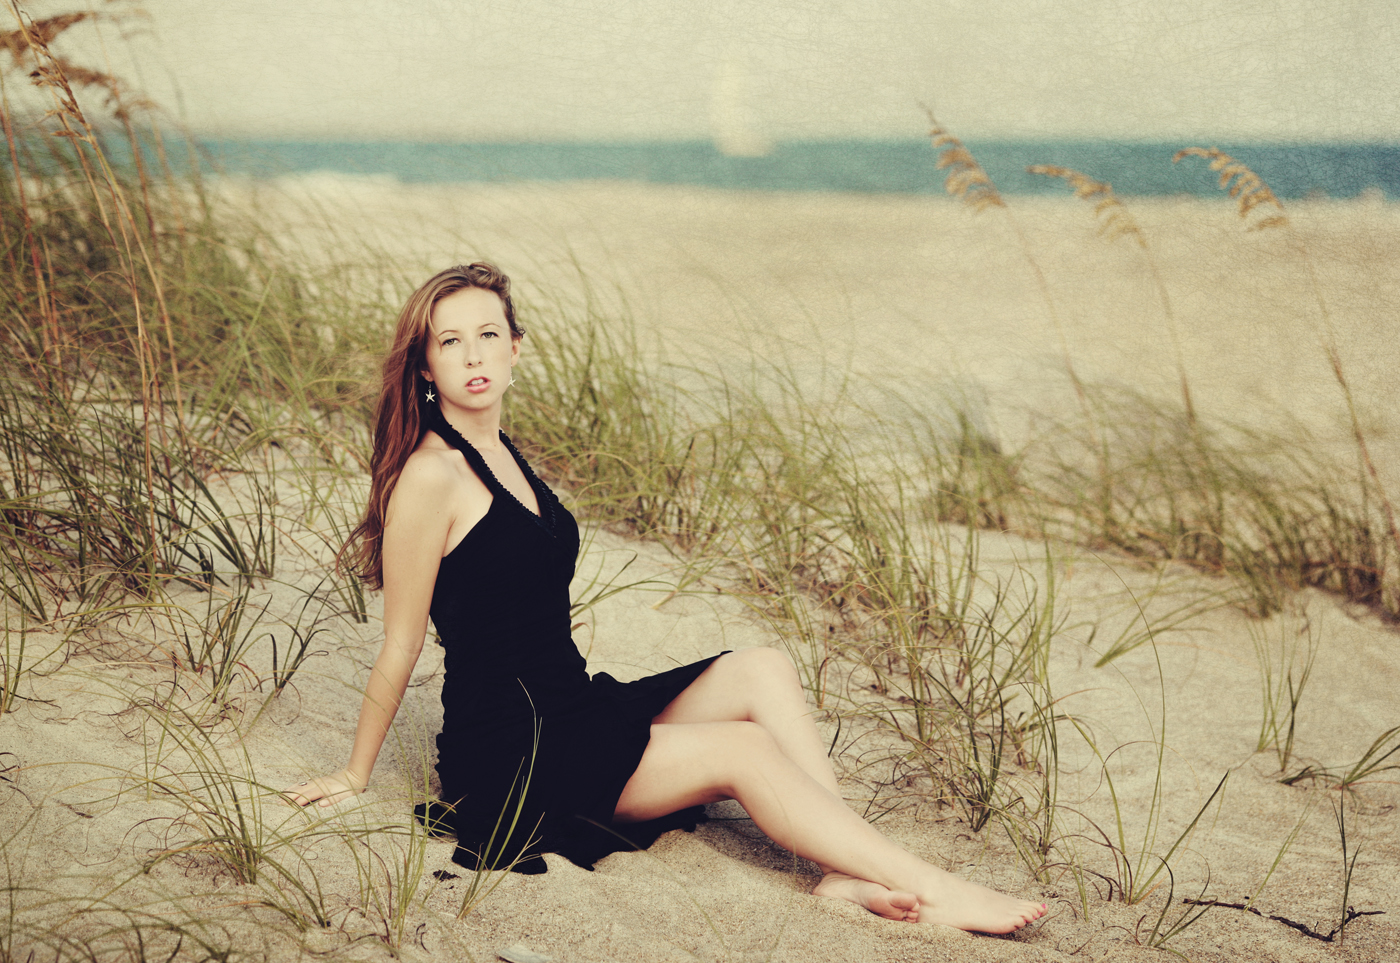 Seaside portraits with Michelle Studios